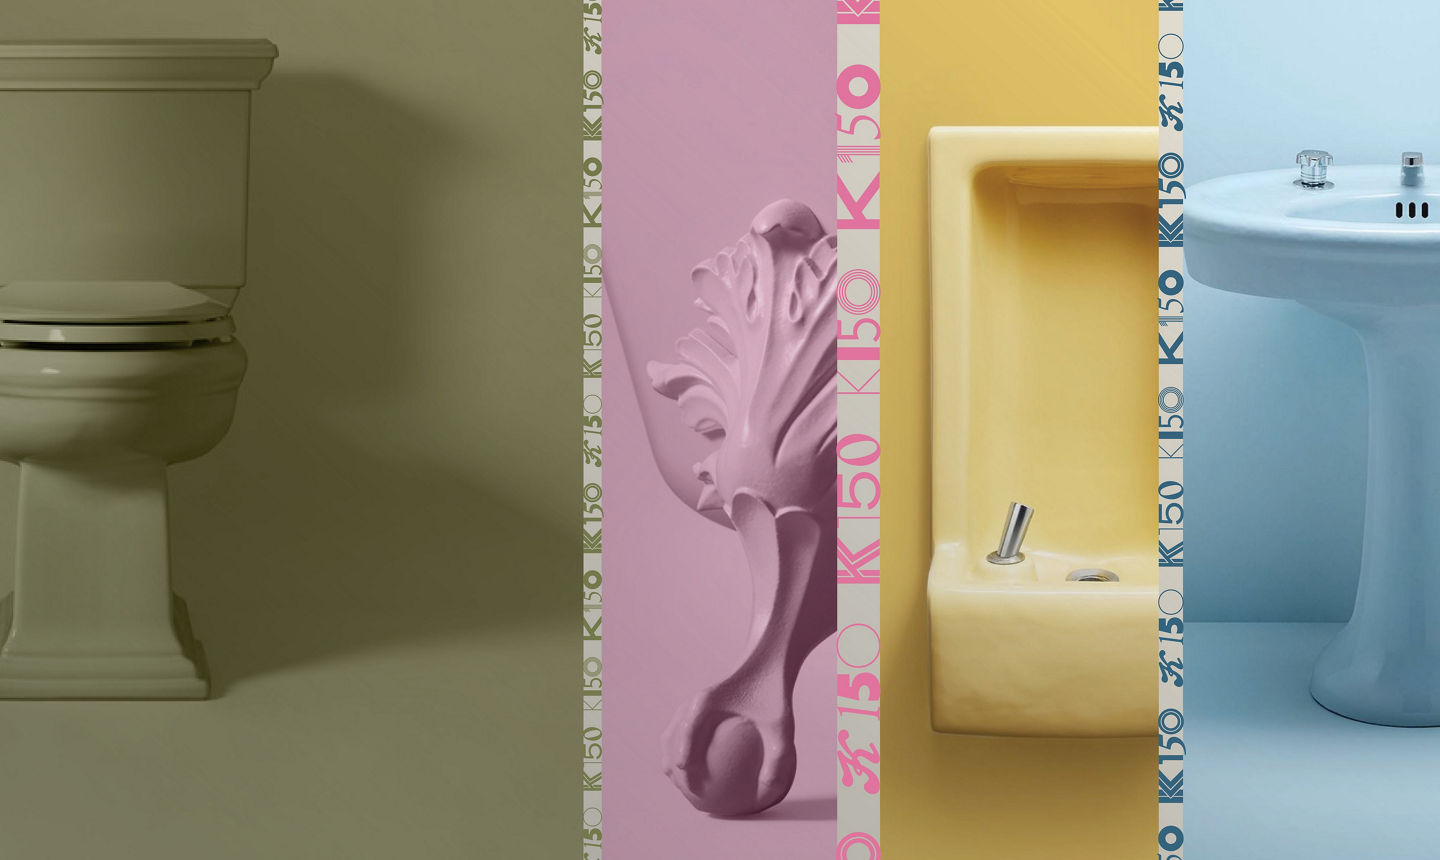 Composite of four close-up images of KOHLER products in vintage colors, featuring an Avocado green toilet, pink claw-foot bath tub, orange sink, and powder blue pedistal sink. A ribbon of Kohler's 150th anniversary logo separates the four images.